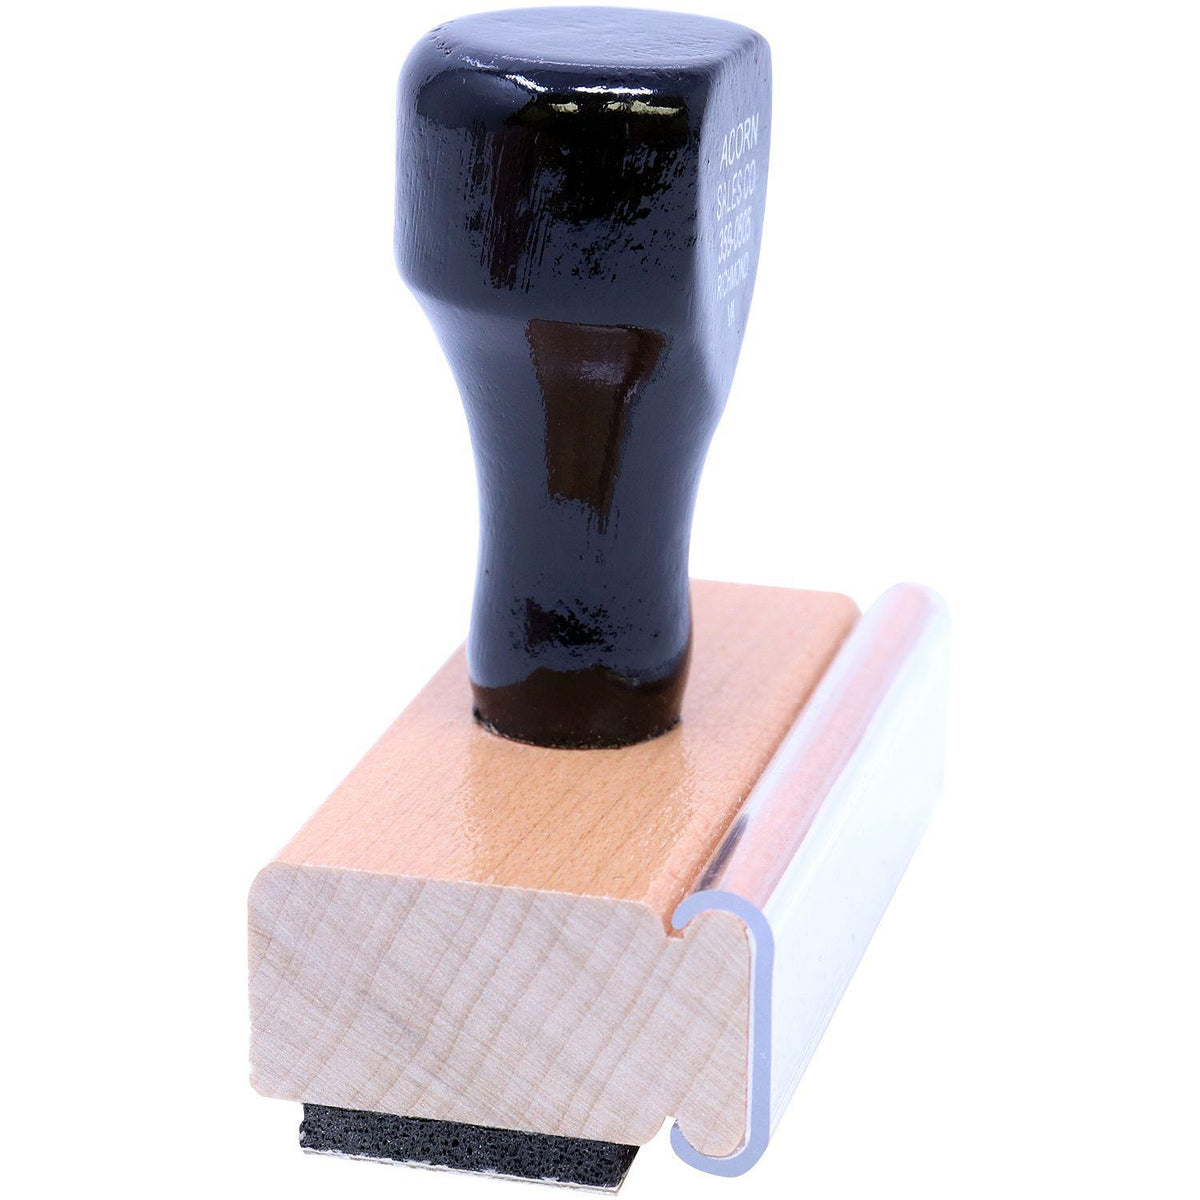 Side View of Confirmation of Phone Order Rubber Stamp at an Angle